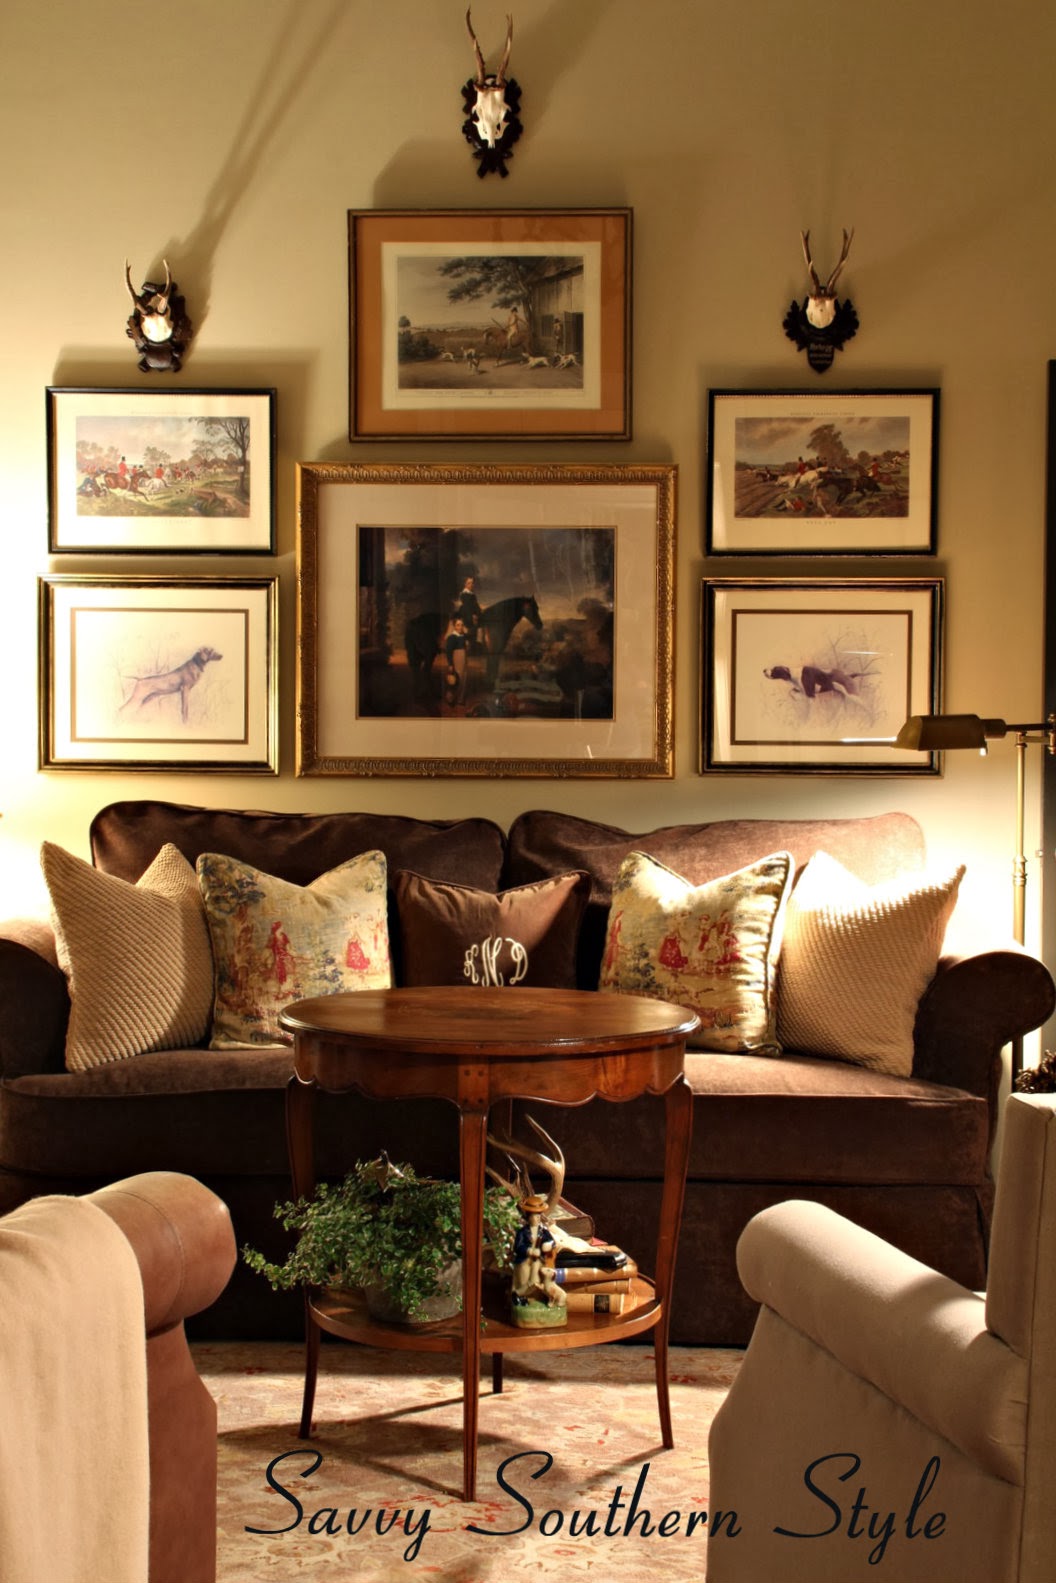 Savvy Southern Style : Decorating With.....Antlers